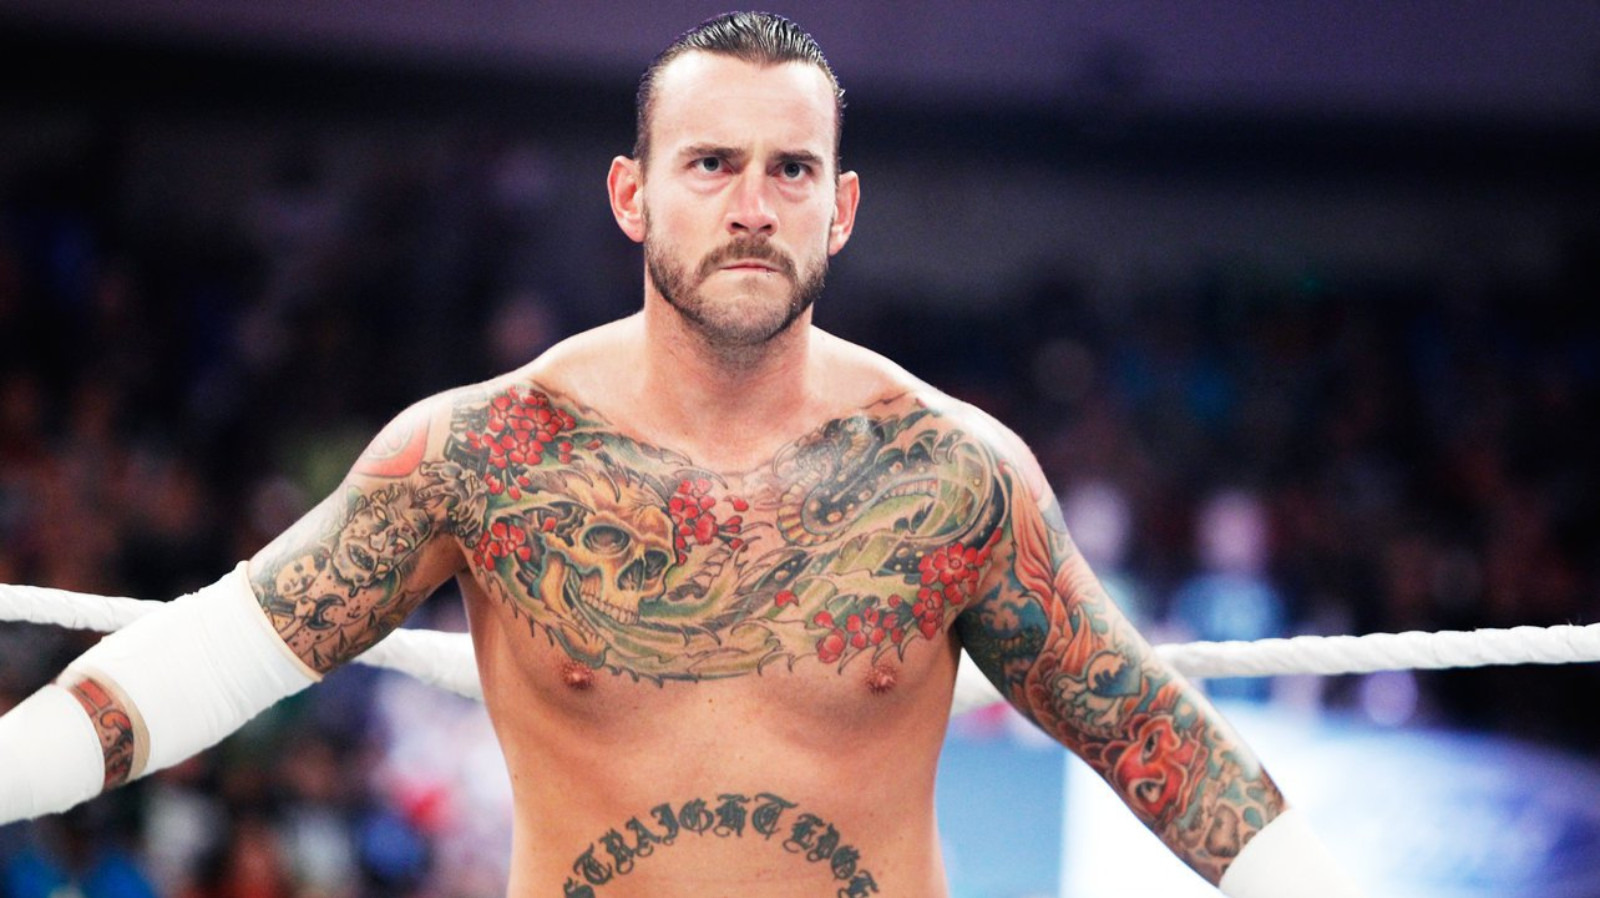 Latest update on possible talks between CM Punk and WWE